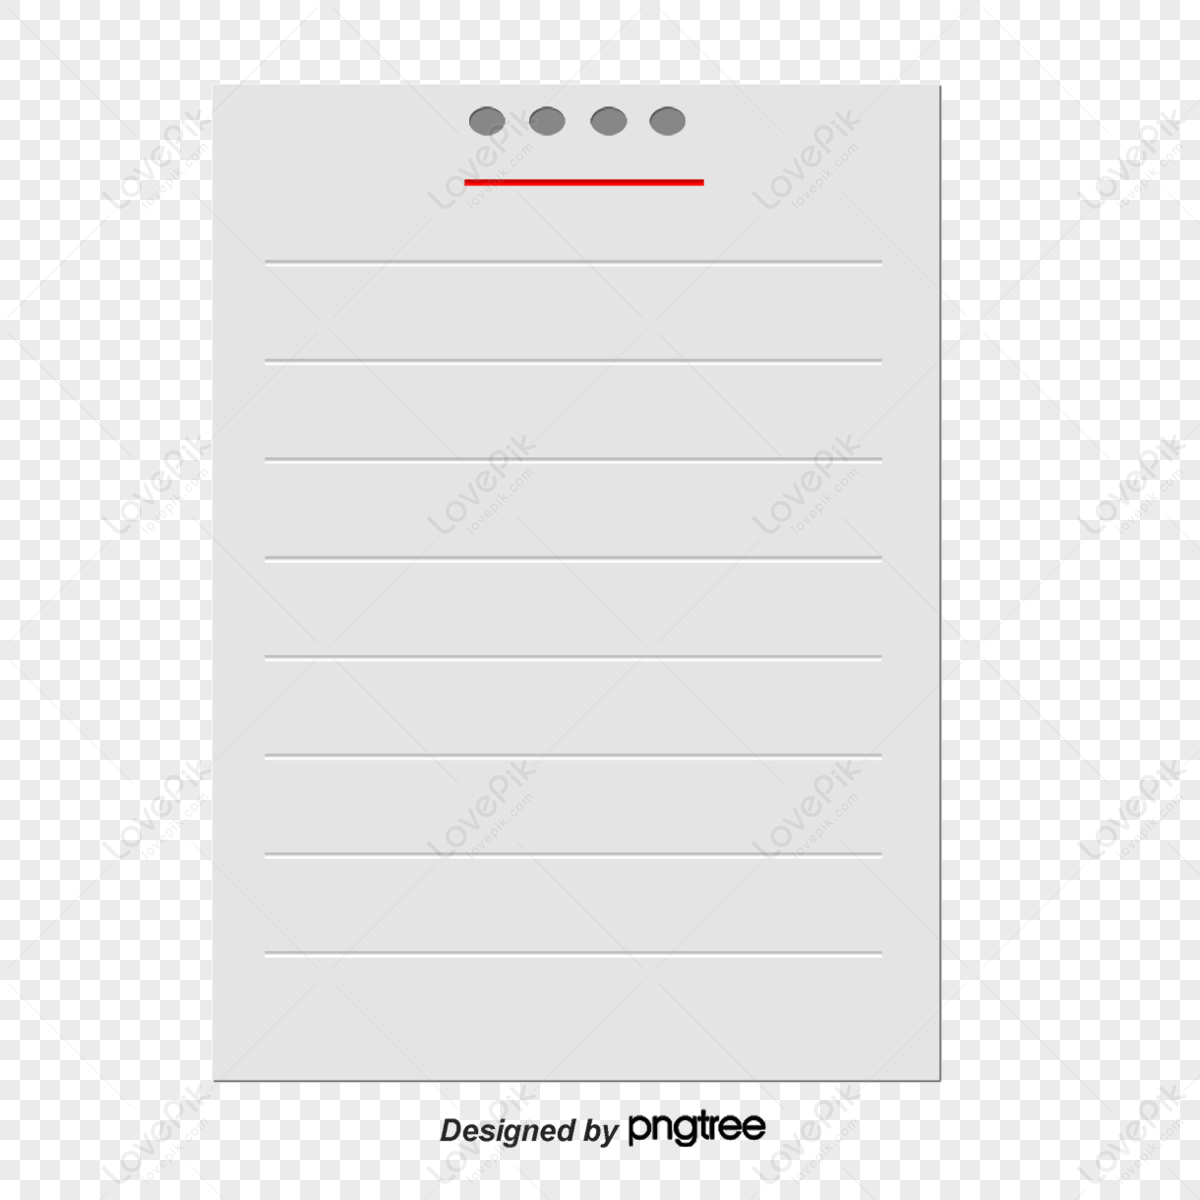 Notebook with blank paper sheet 21013648 PNG